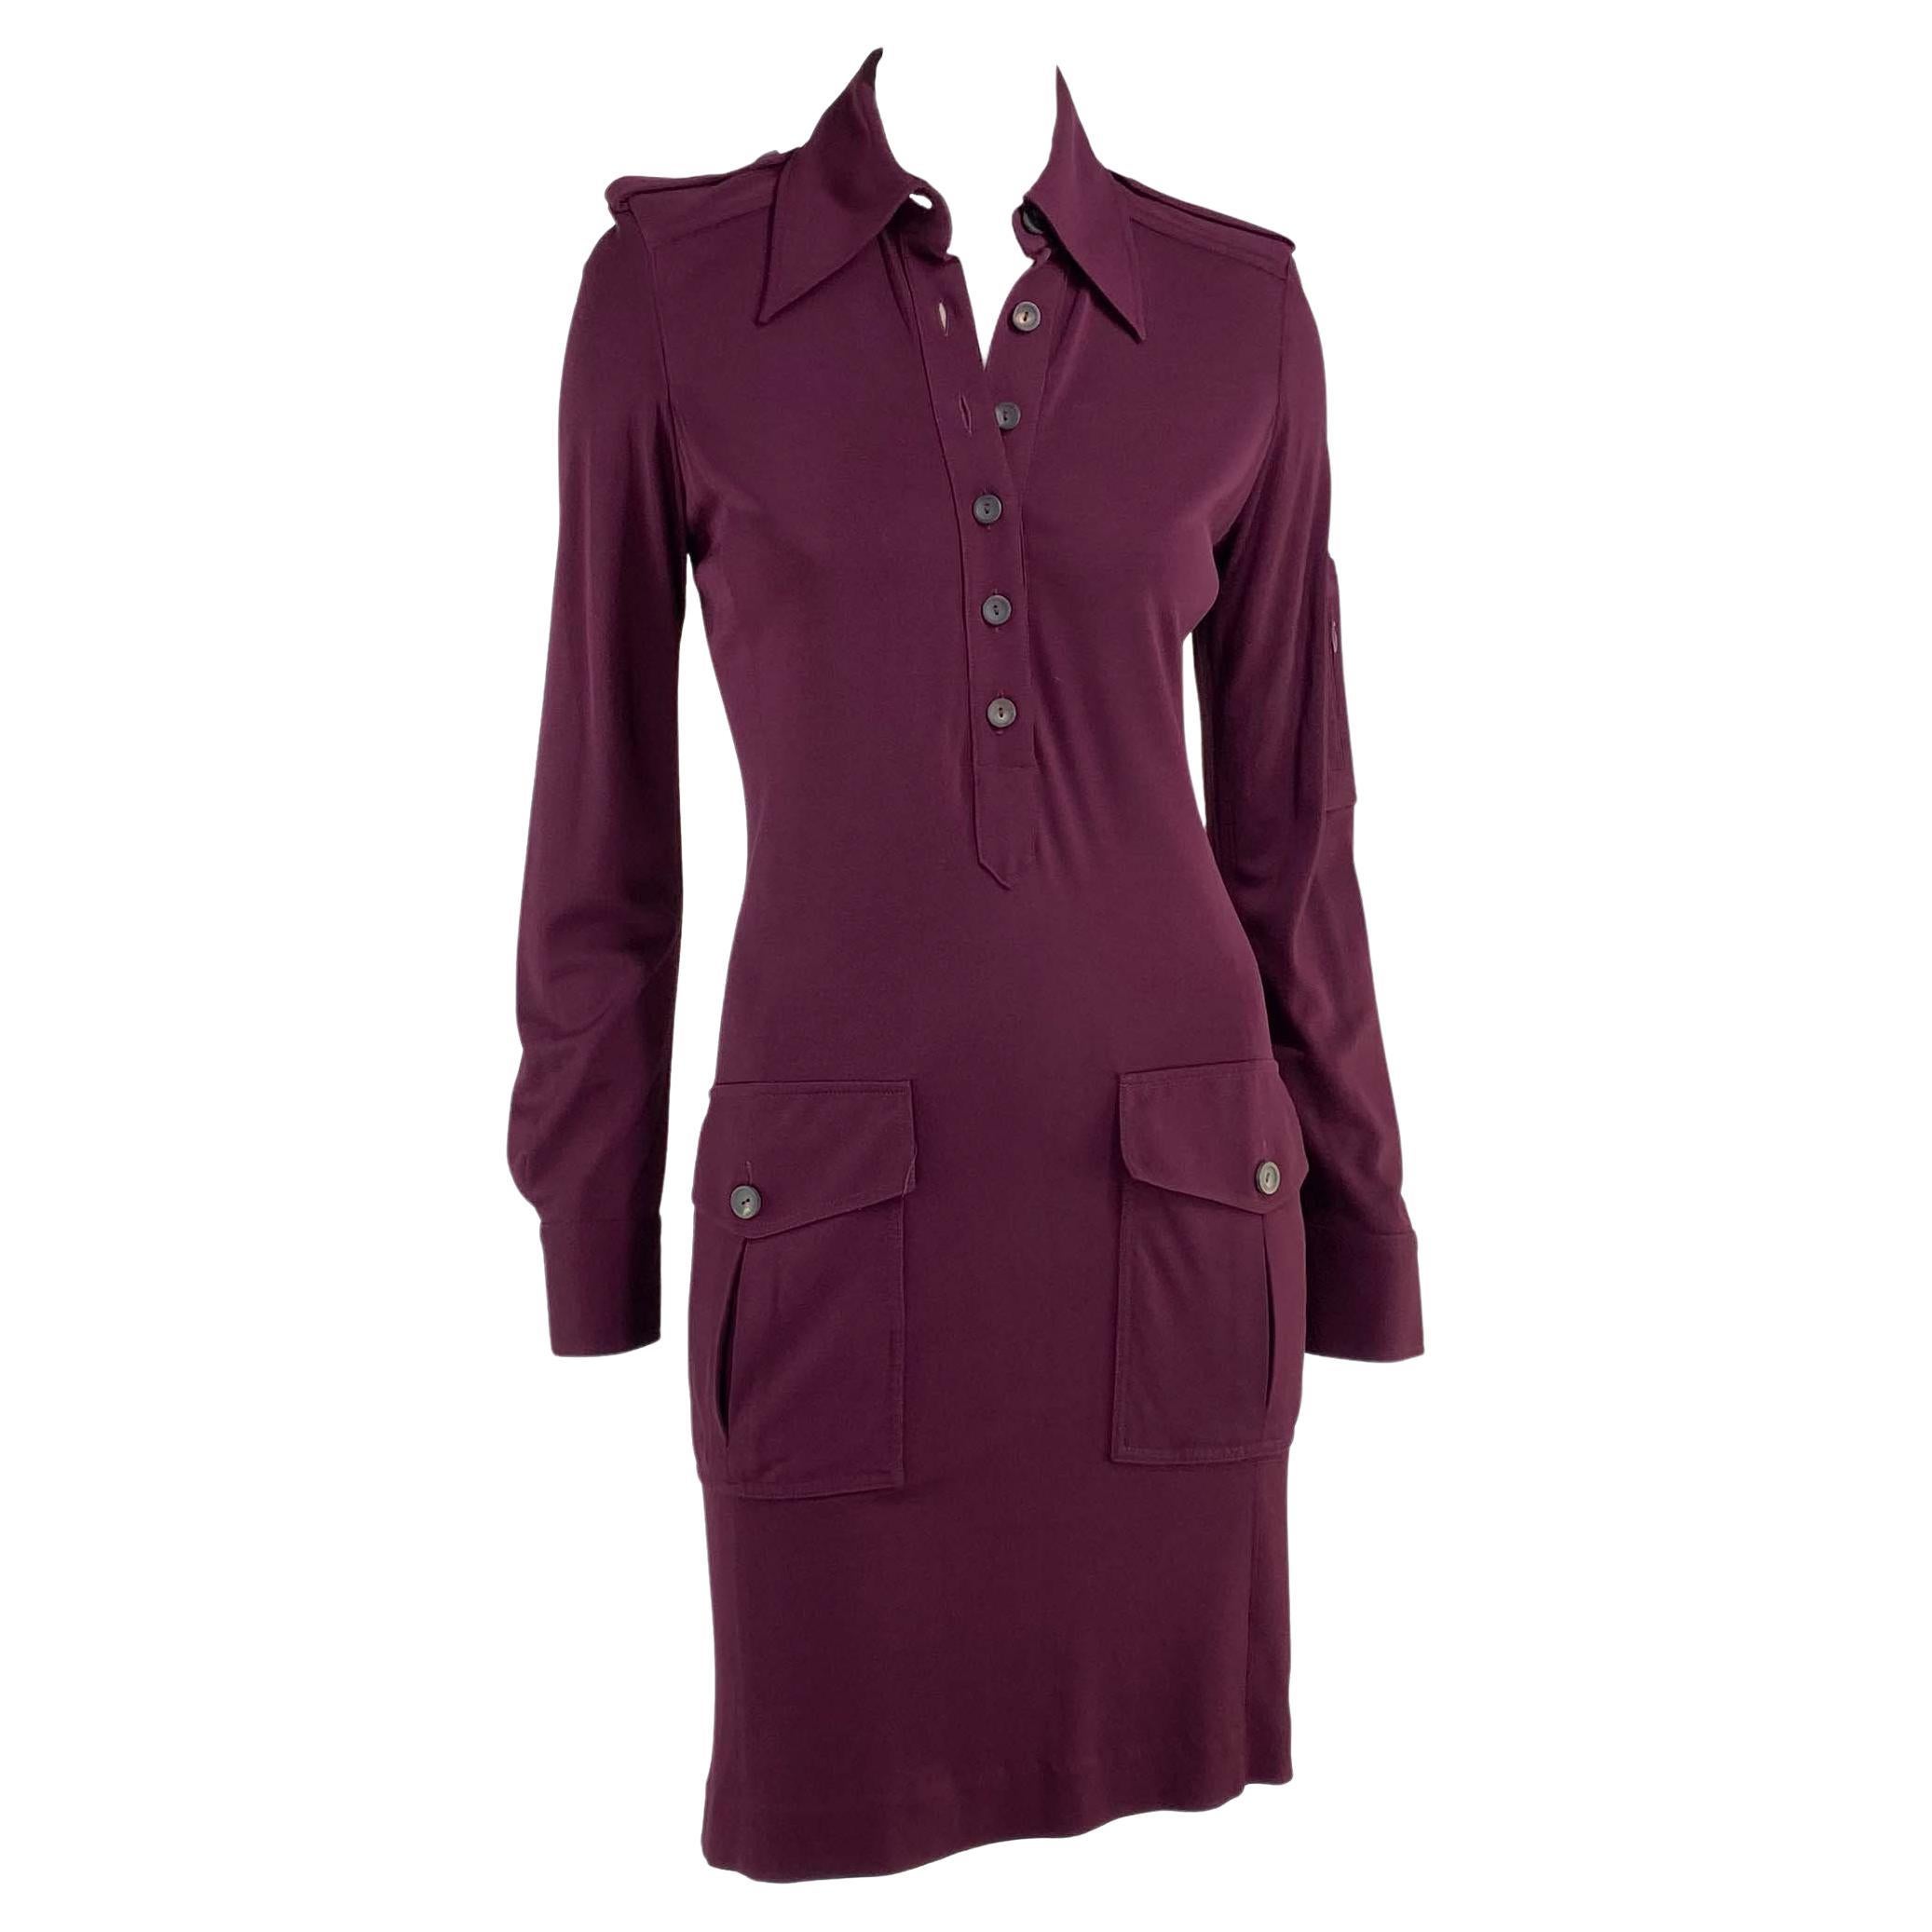 F/W 1996 Gucci by Tom Ford Burgundy Military Inspired Button Up Pocket Dress For Sale